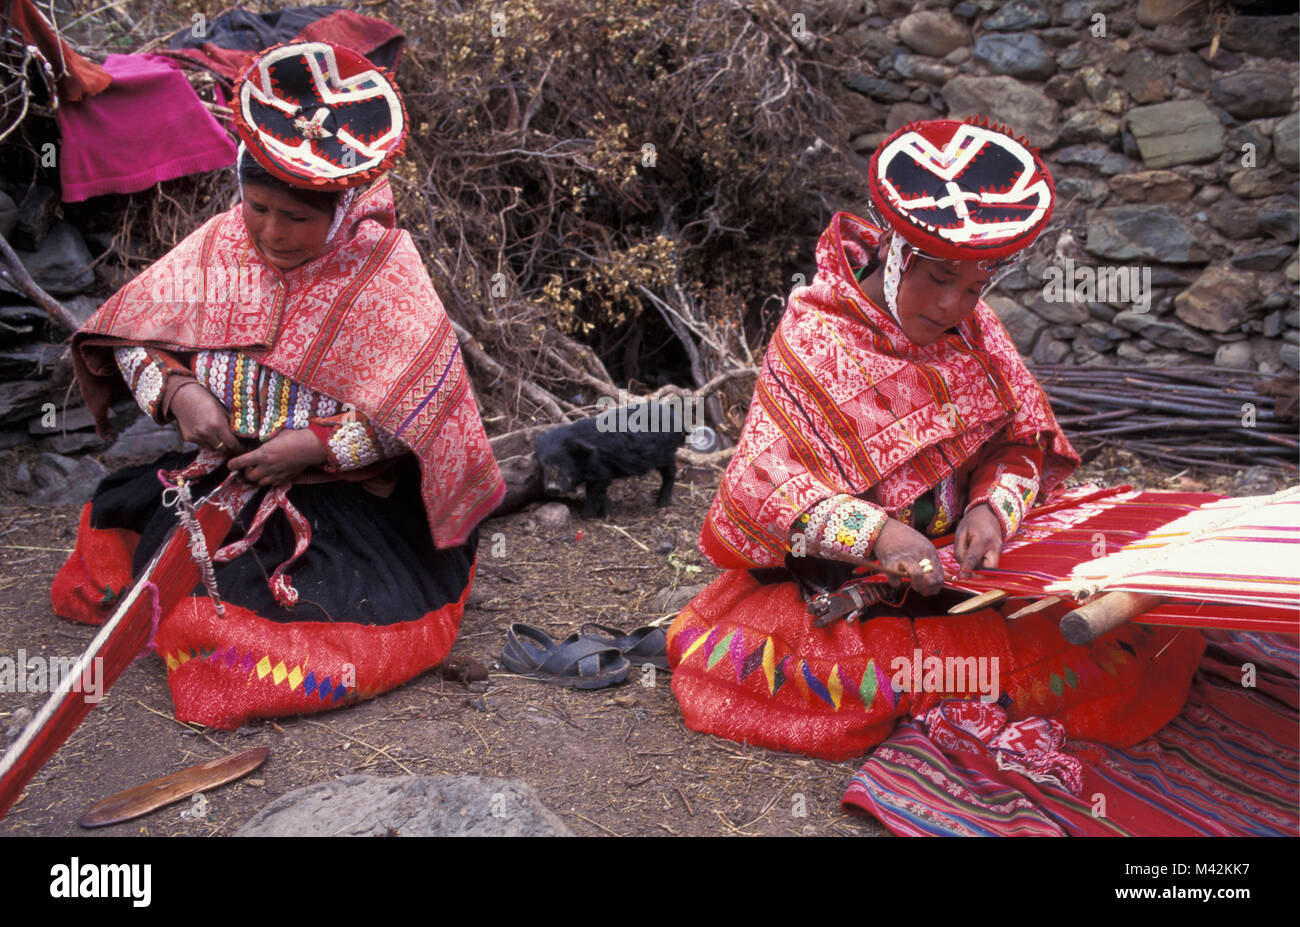 Peru. Huilloc or Willoc. Near Ollantaytambo and Cusco, Cuzco,  Women weaving in traditional clothing on countryside. Stock Photo